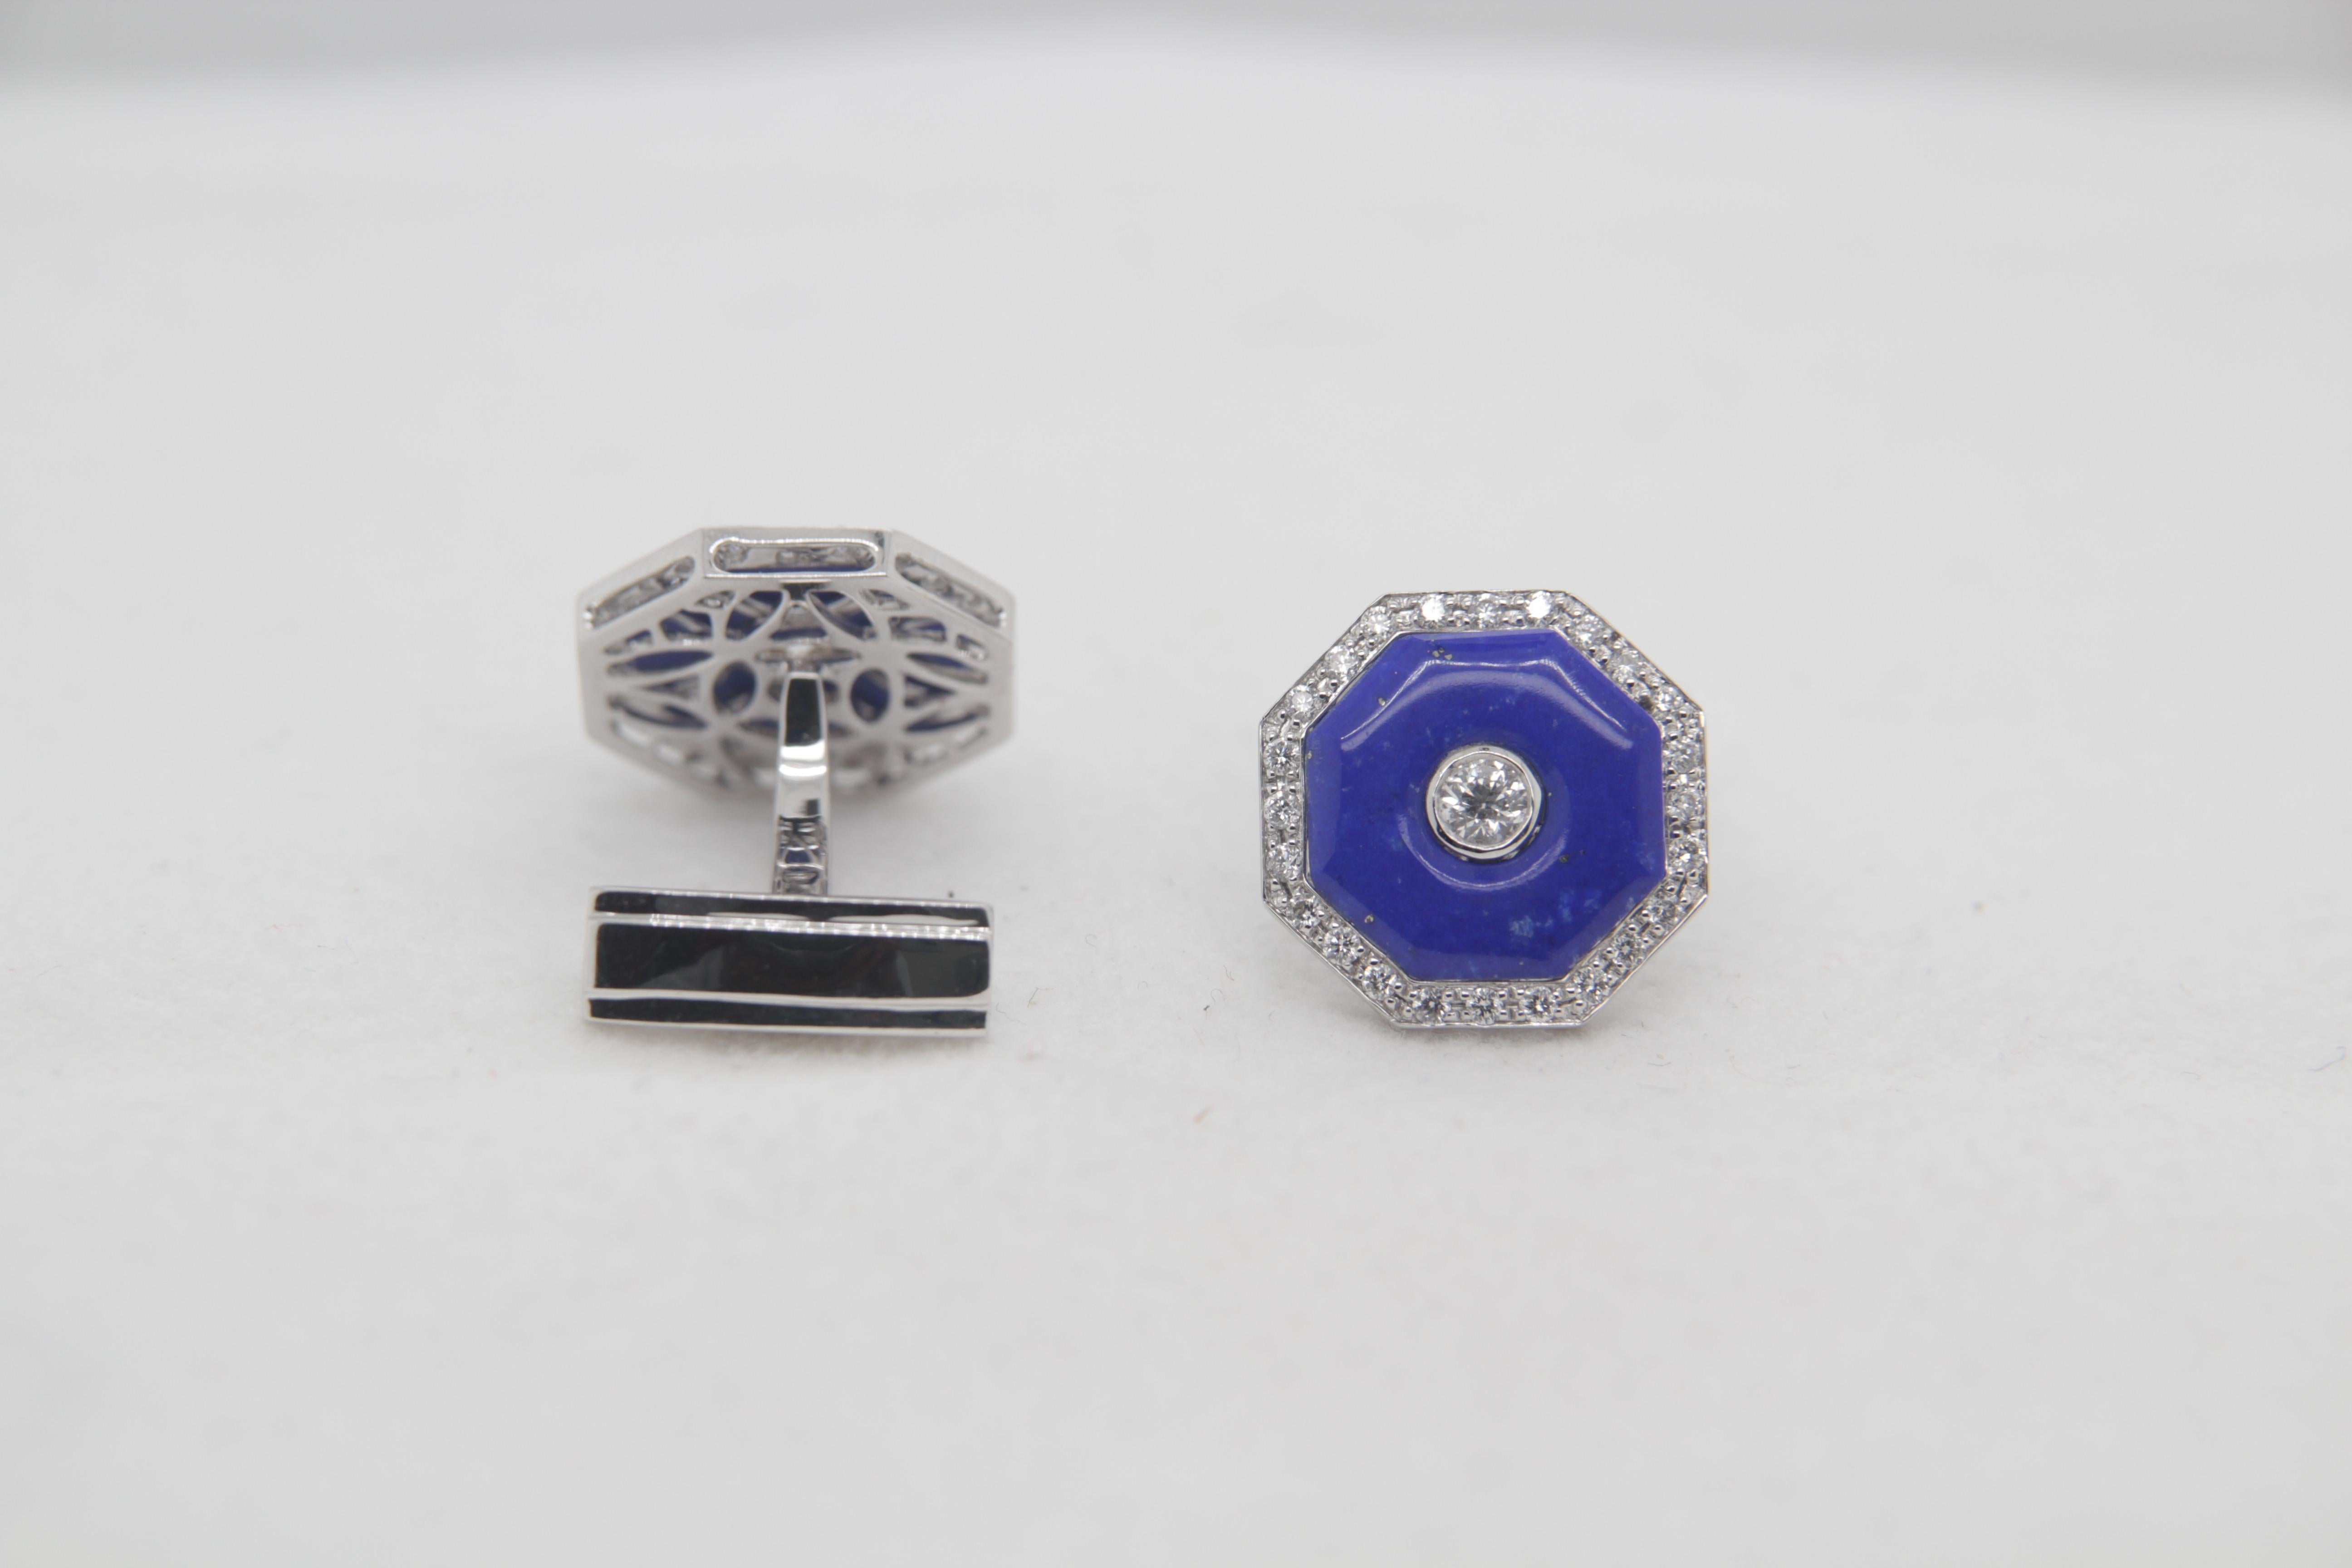 A brand new diamond and lapis cufflinks in 18 Karat gold. The total diamond weight is 0.80 carats, lapis weight is 3.99 carats and total cufflinks weight is 10.60 grams.  